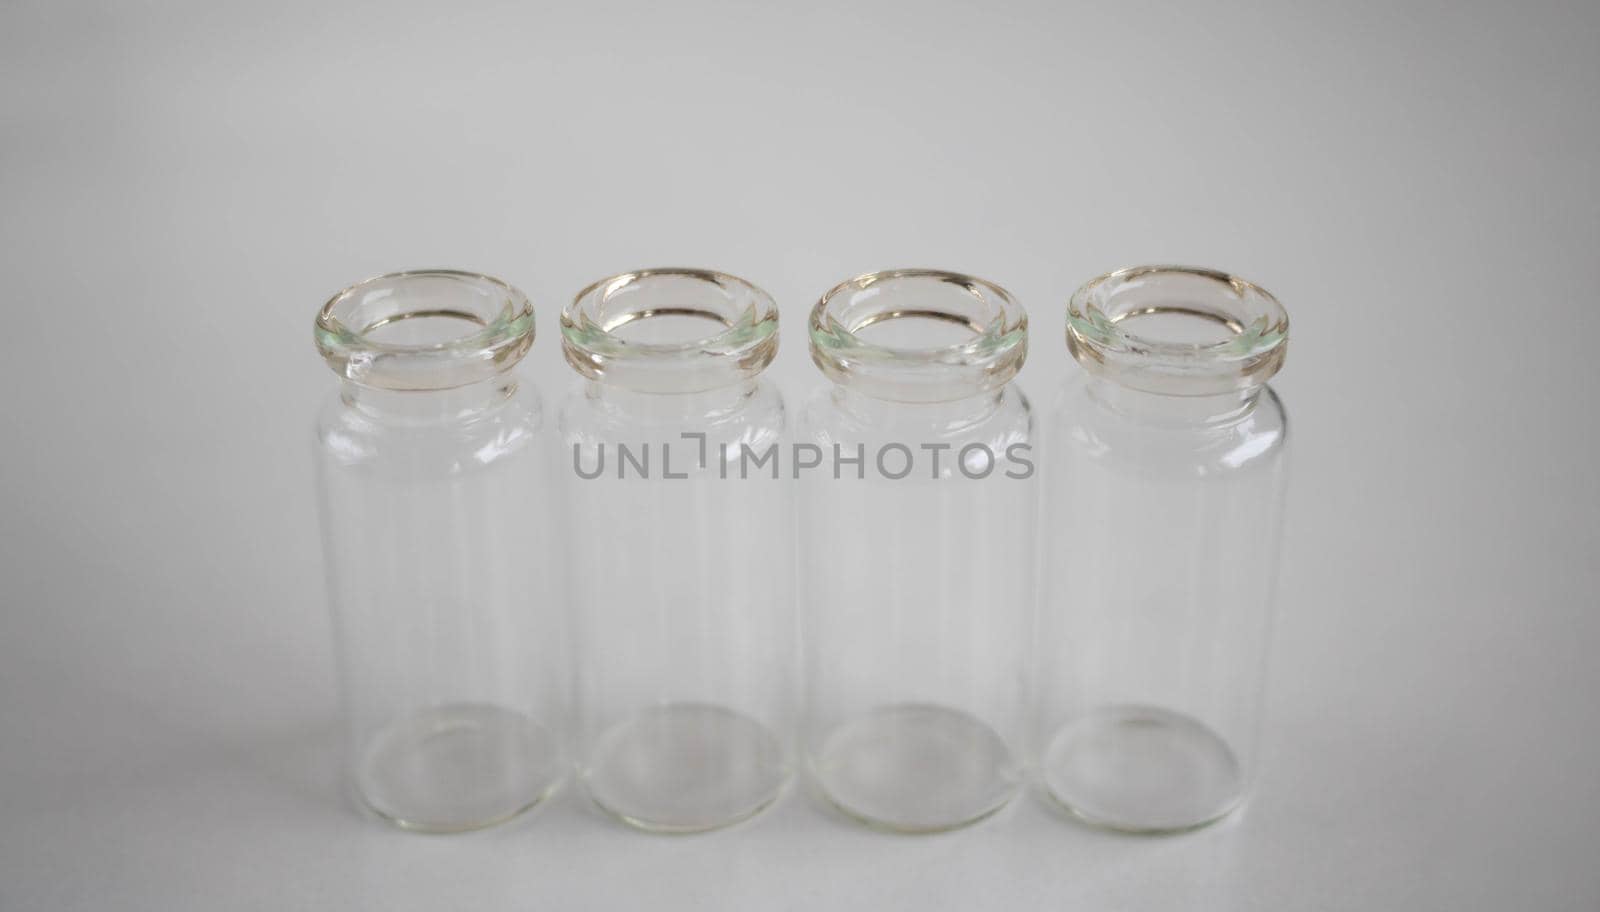 Empty glass bottles for storing medicines, liquids on a white background by lapushka62